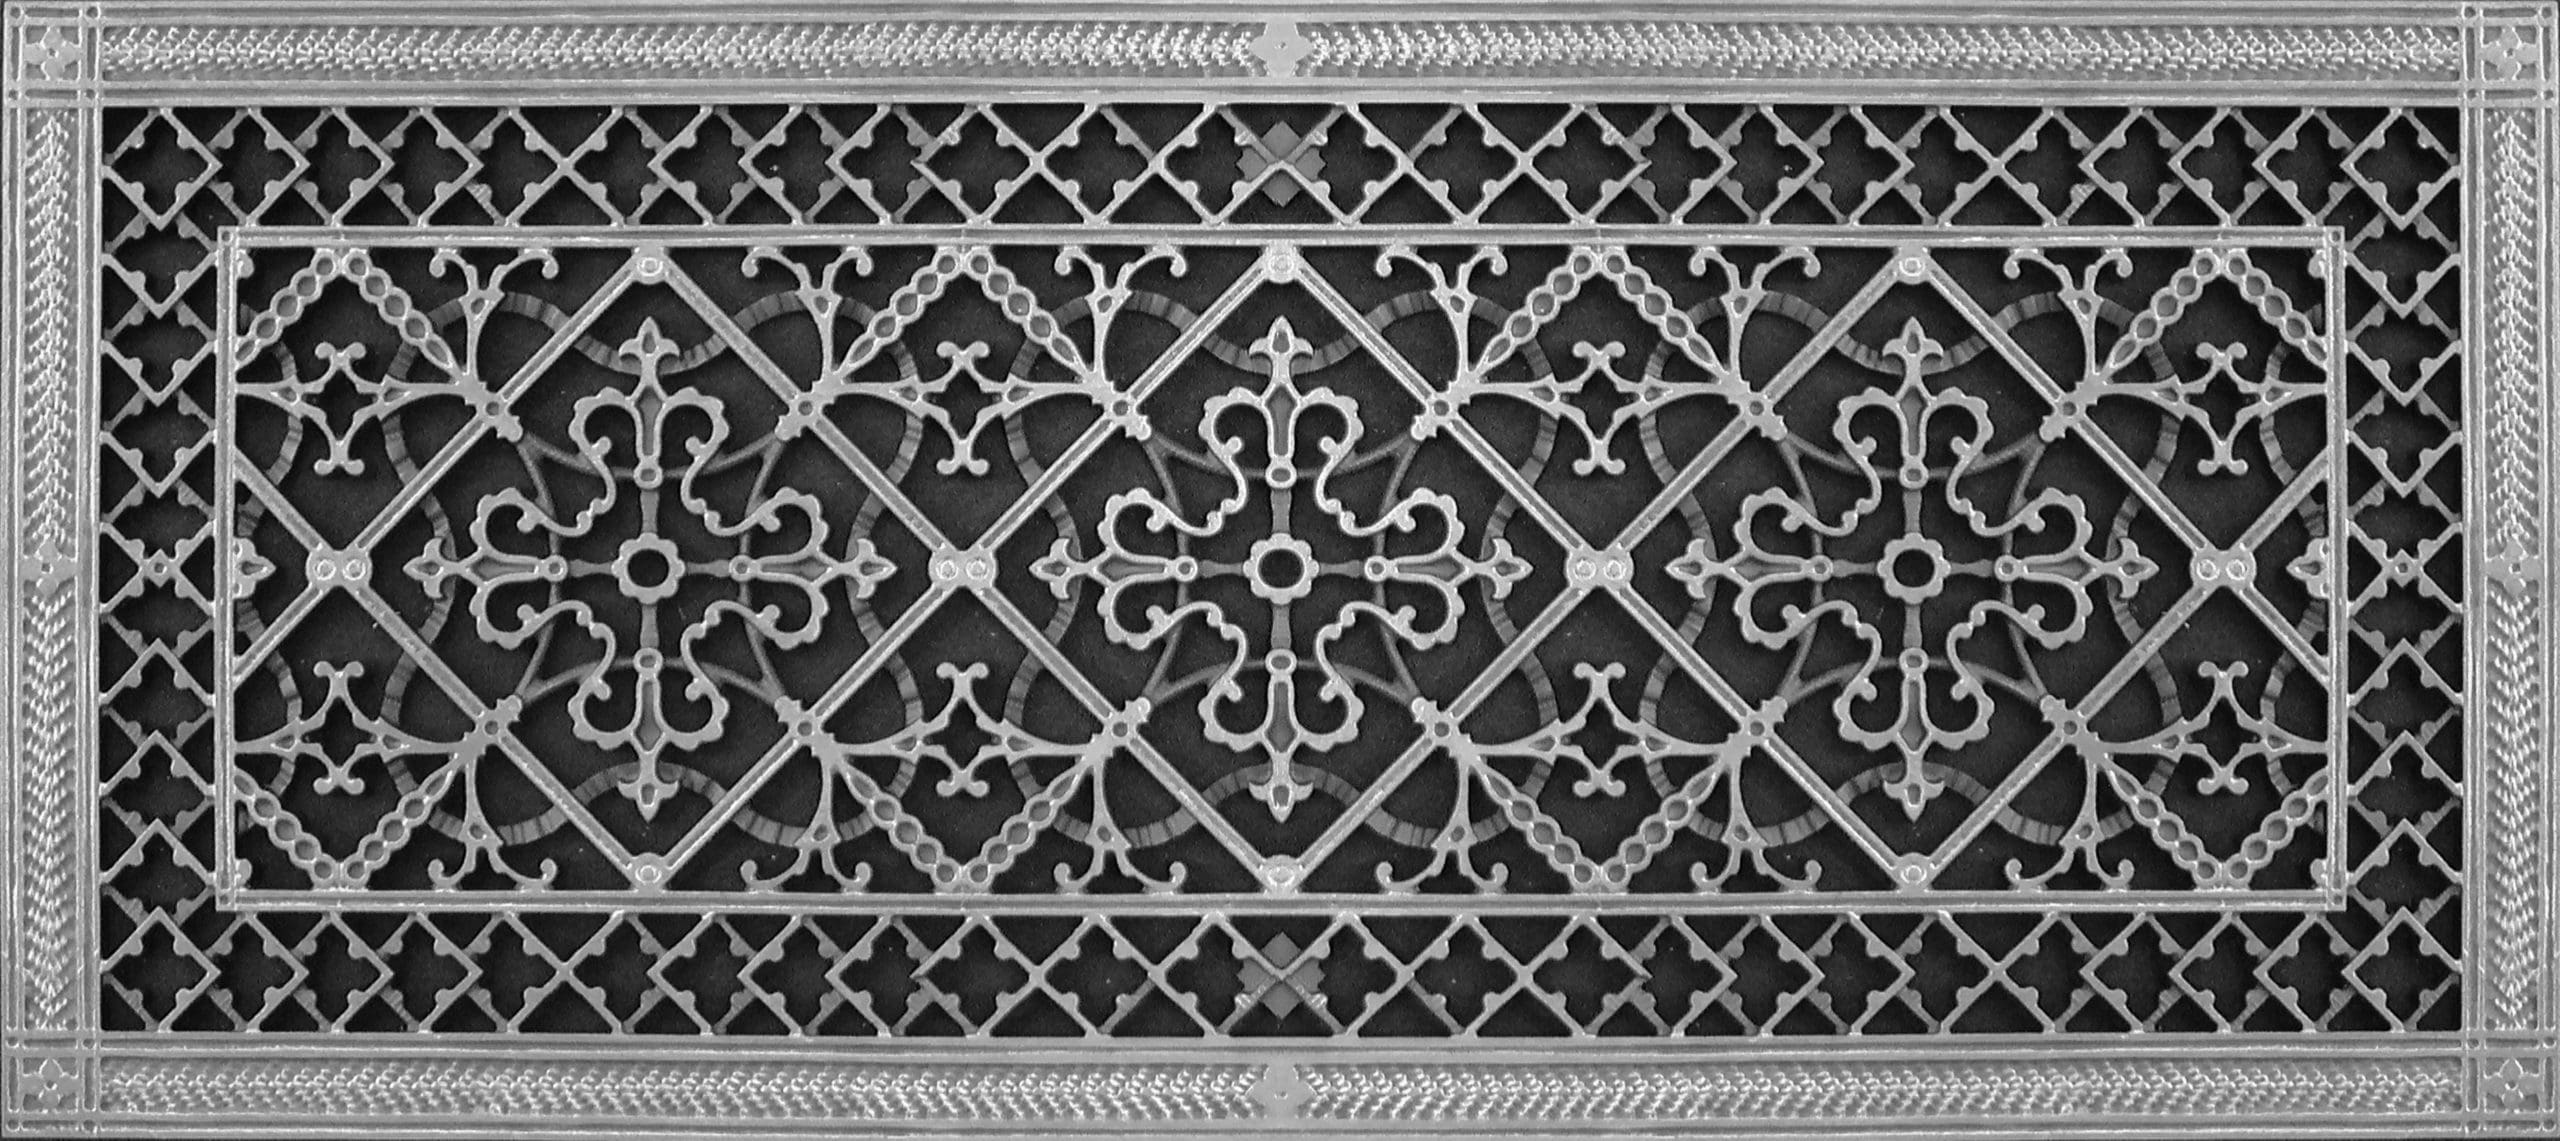 Decorative Grille Craftsman Style Arts and Crafts 12" x 30" in Nickel Finish.